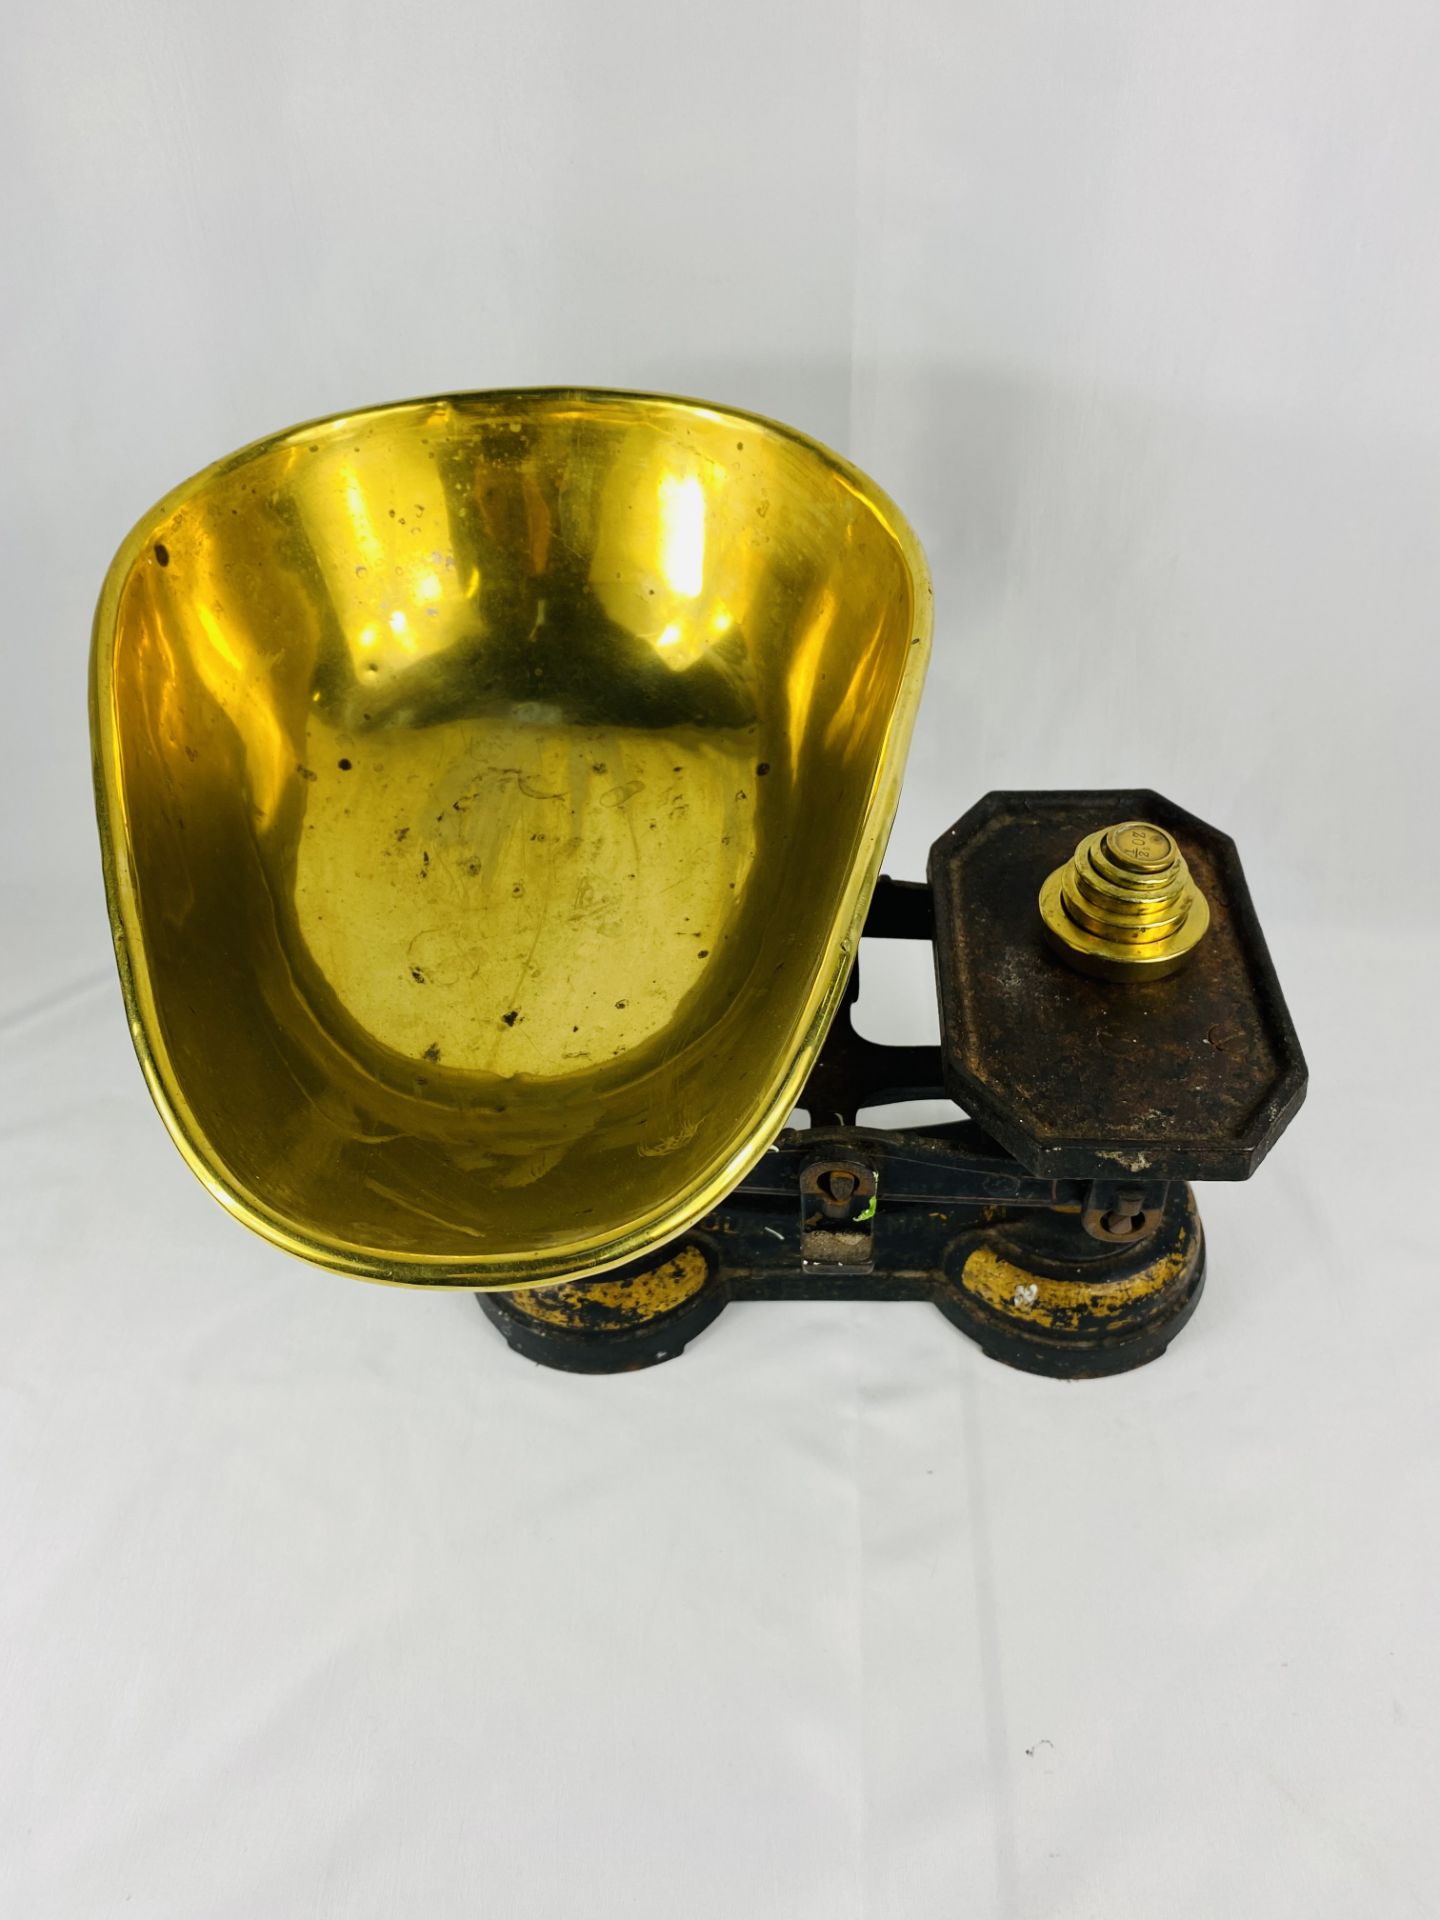 Set of Young Son and Matthew scales with brass bowl and weights, - Image 2 of 3